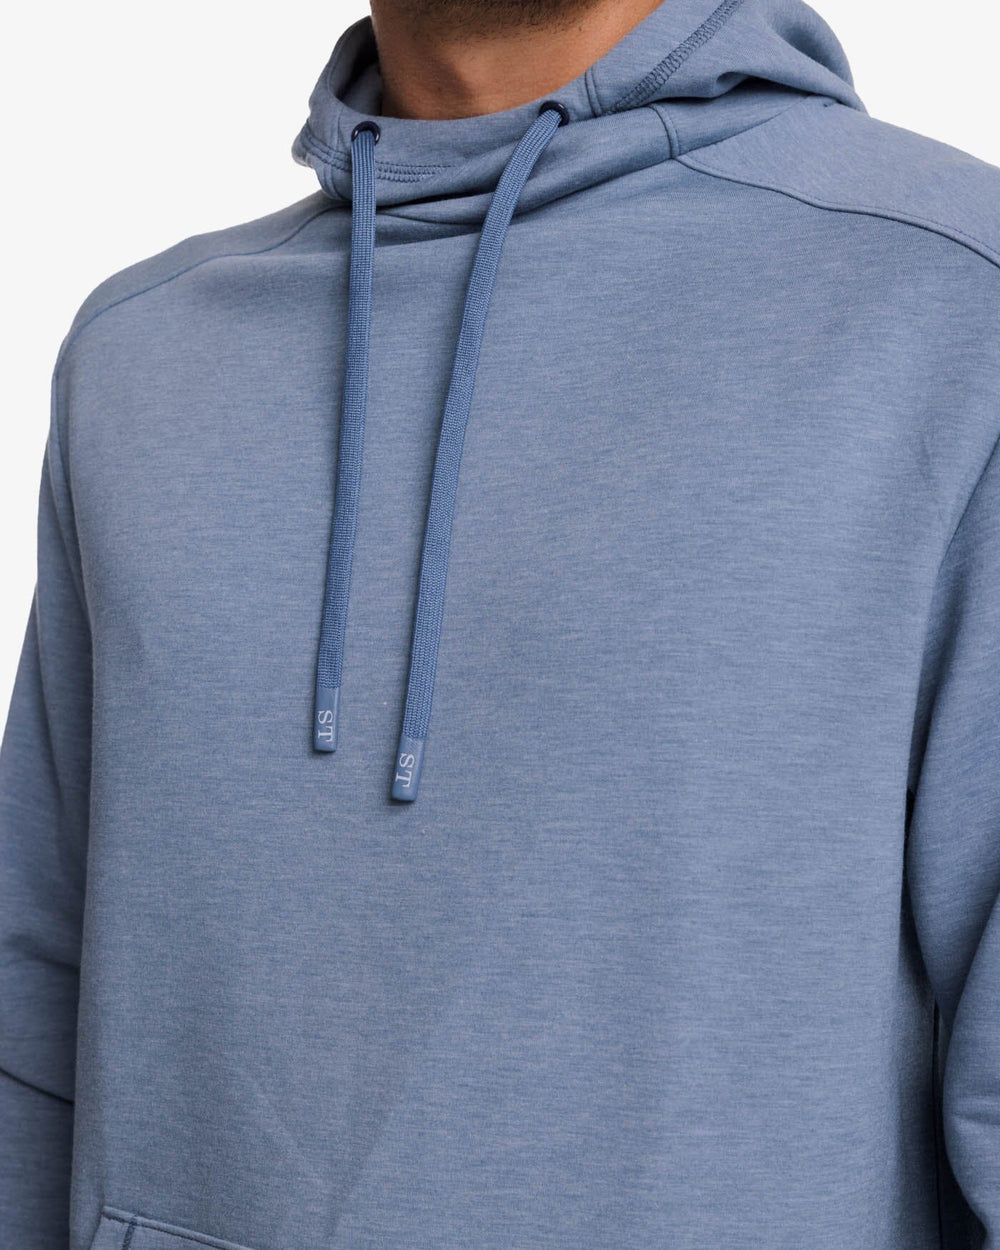 The detail view of the Southern Tide Stratford Heather Interlock Hoodie by Southern Tide - Heather Blue Haze